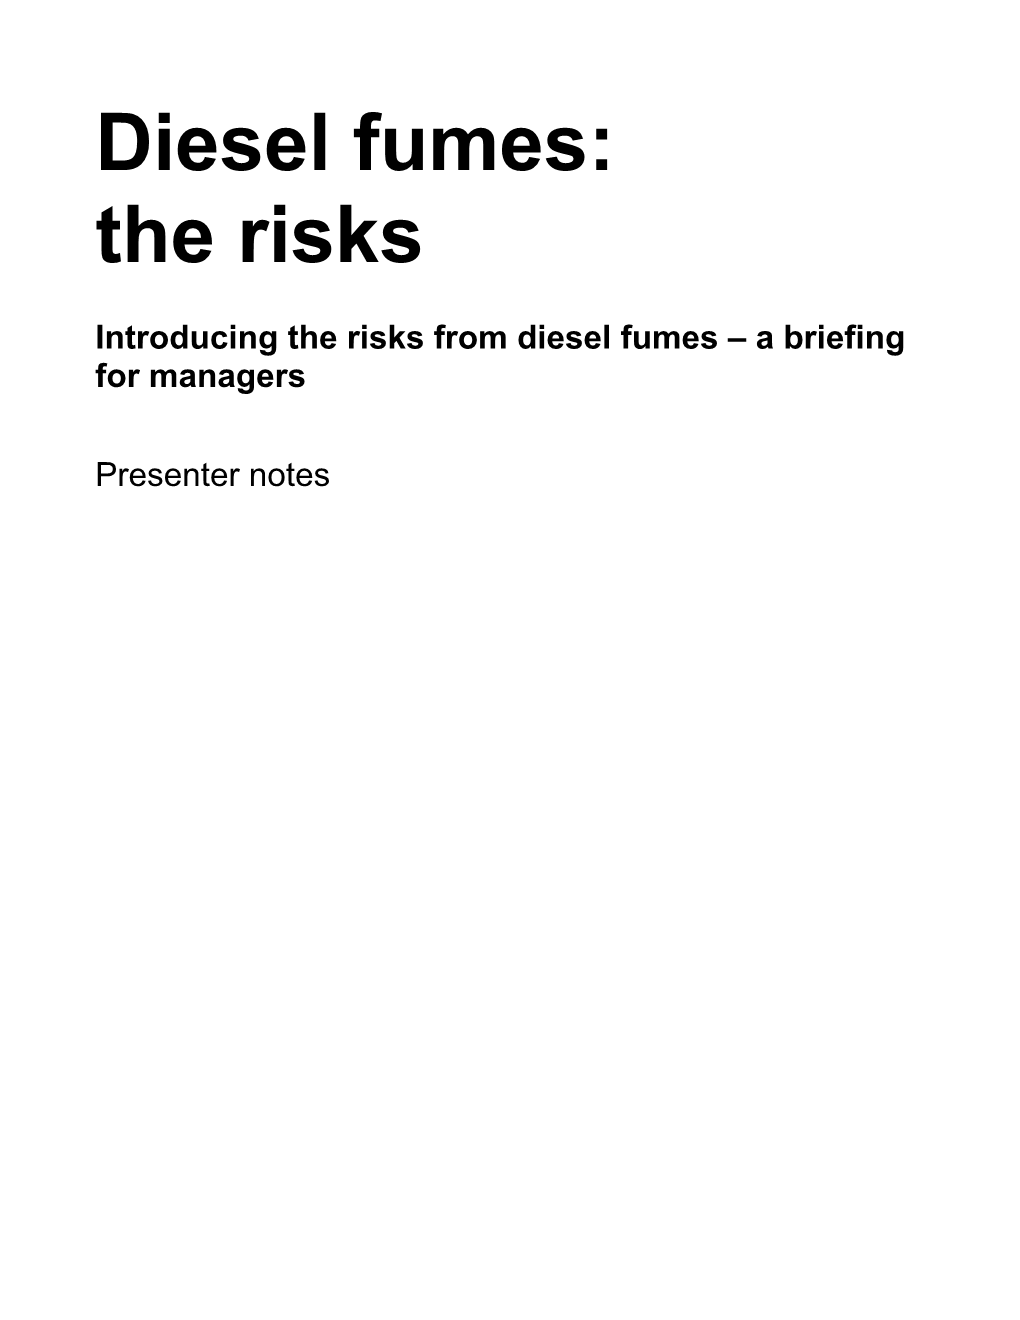 Introducing the Risks from Diesel Fumes a Briefing for Managers